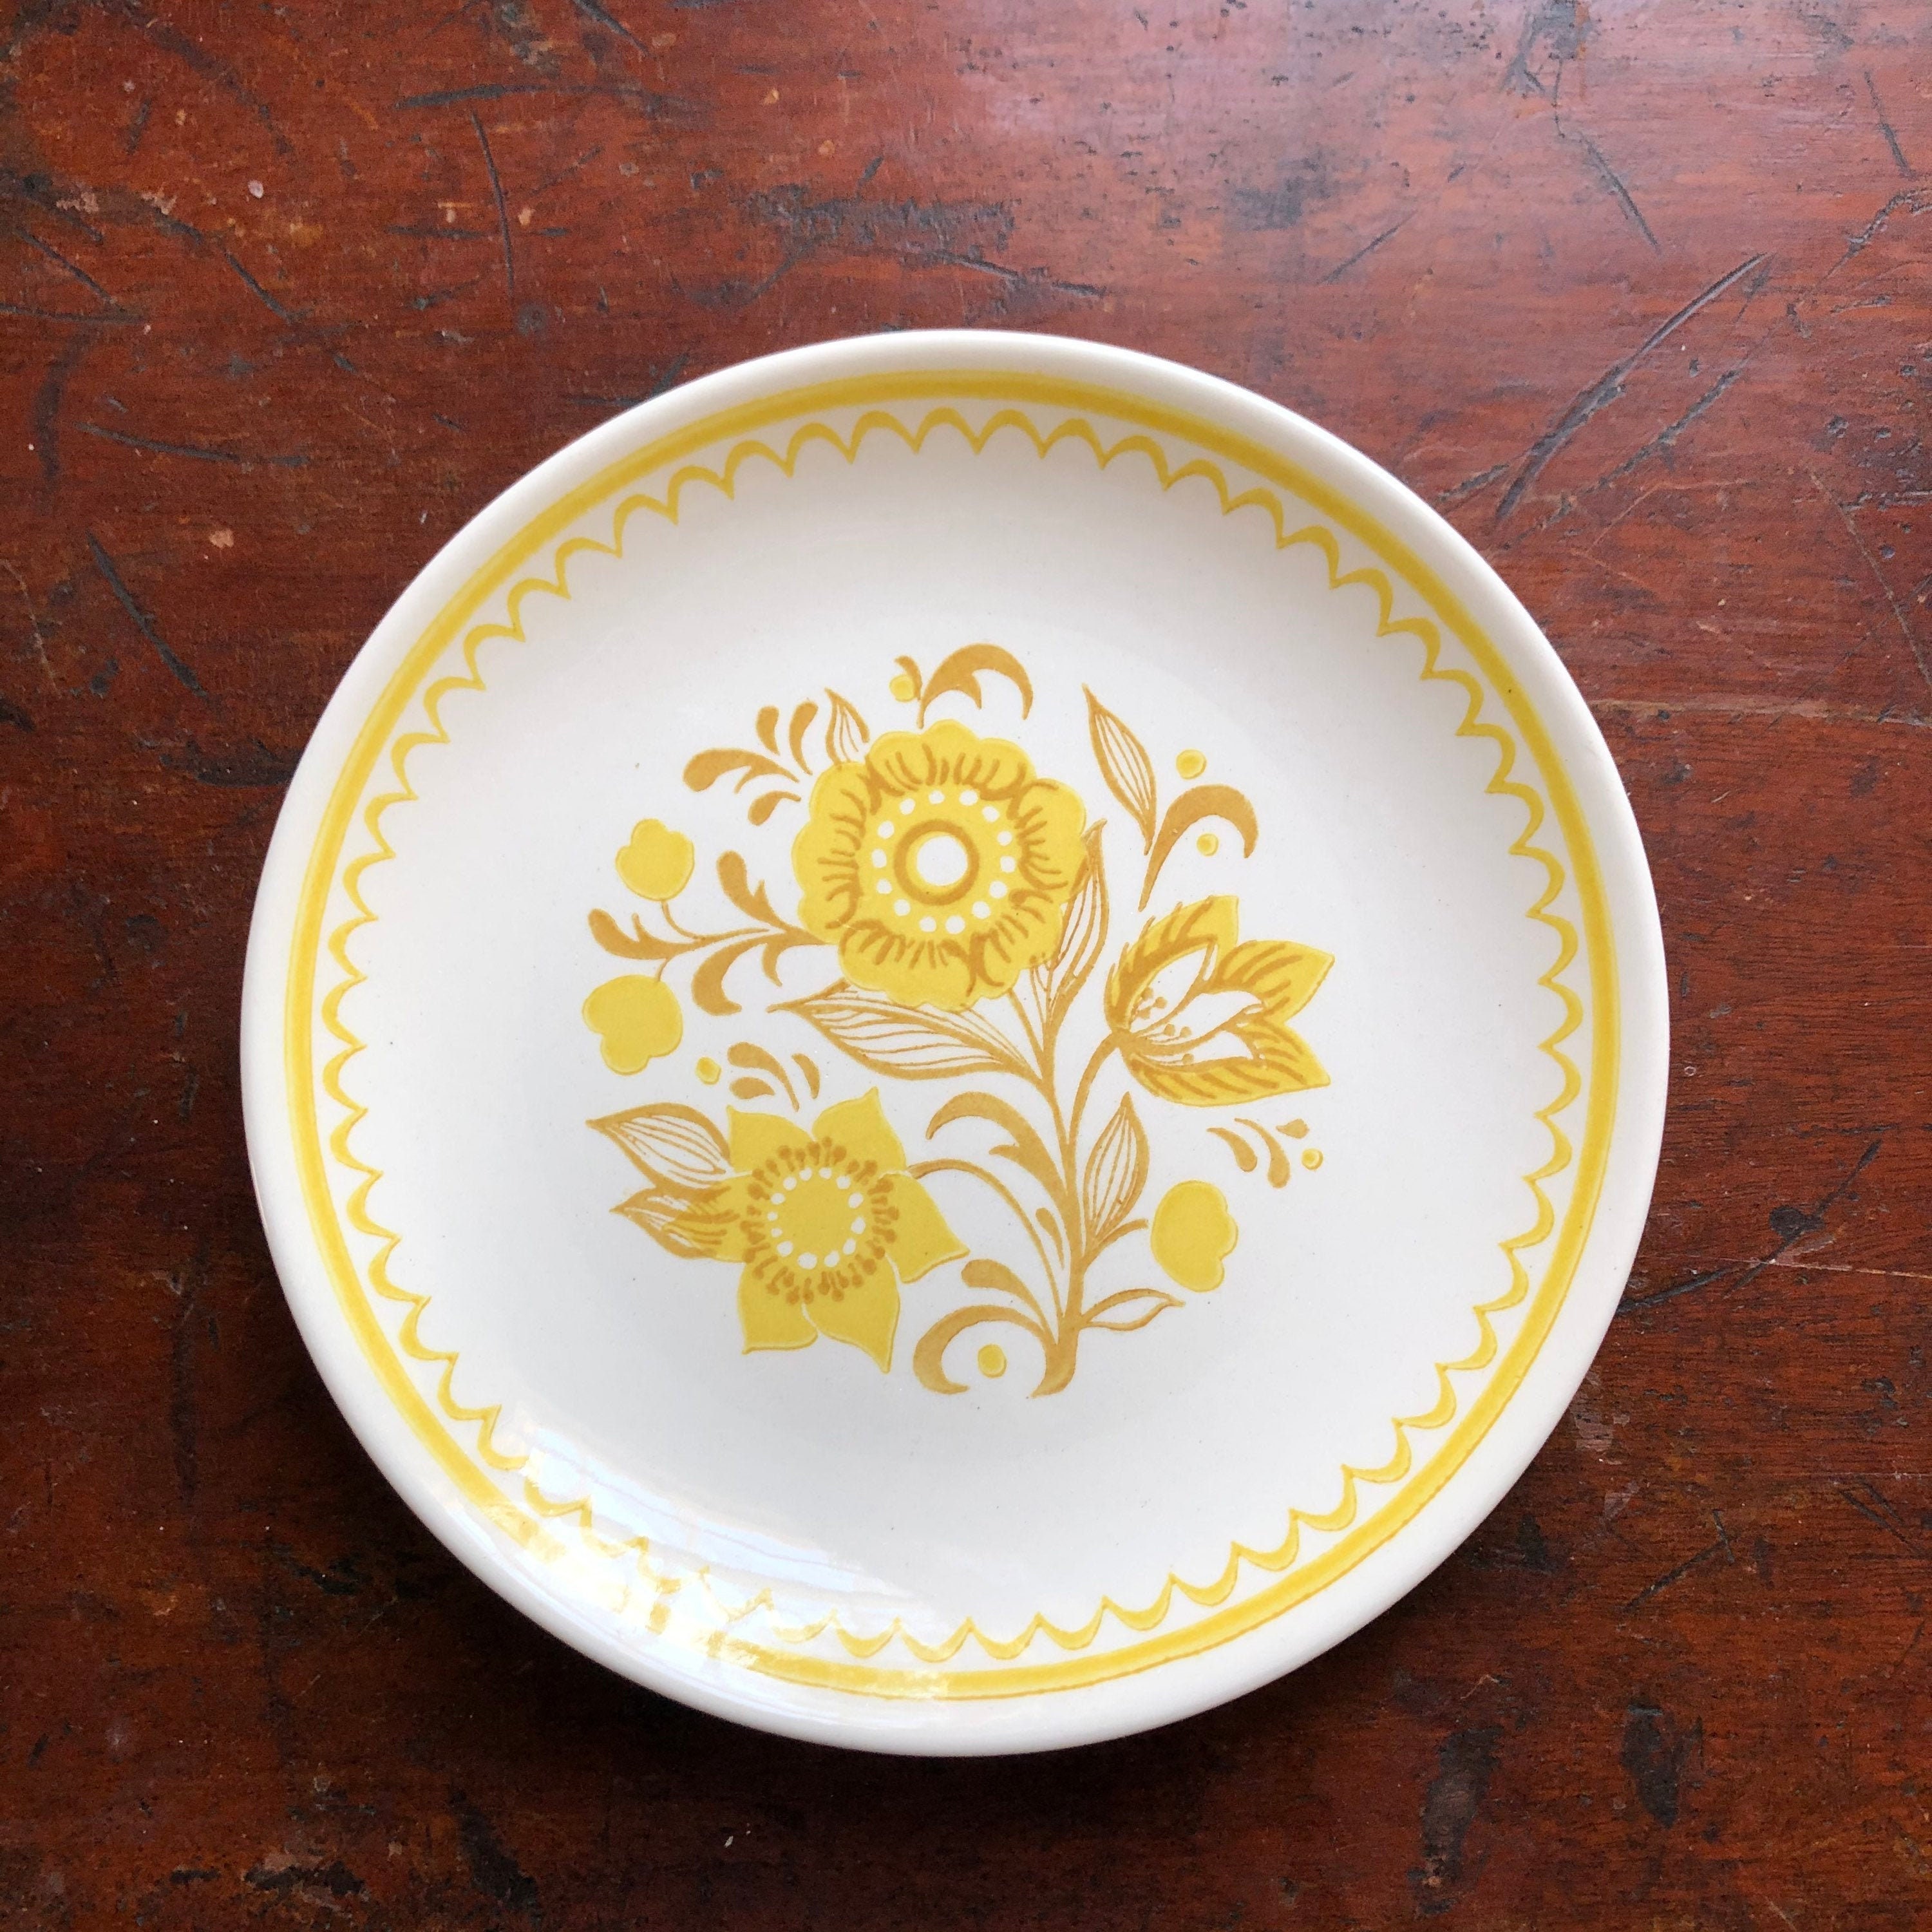 Royal China Cavalier Iron Stone Plates Dinner Plates Iron Stone Nutmeg Pattern Just in Time for Mother's Day gift Cavalier Nutmeg Plates